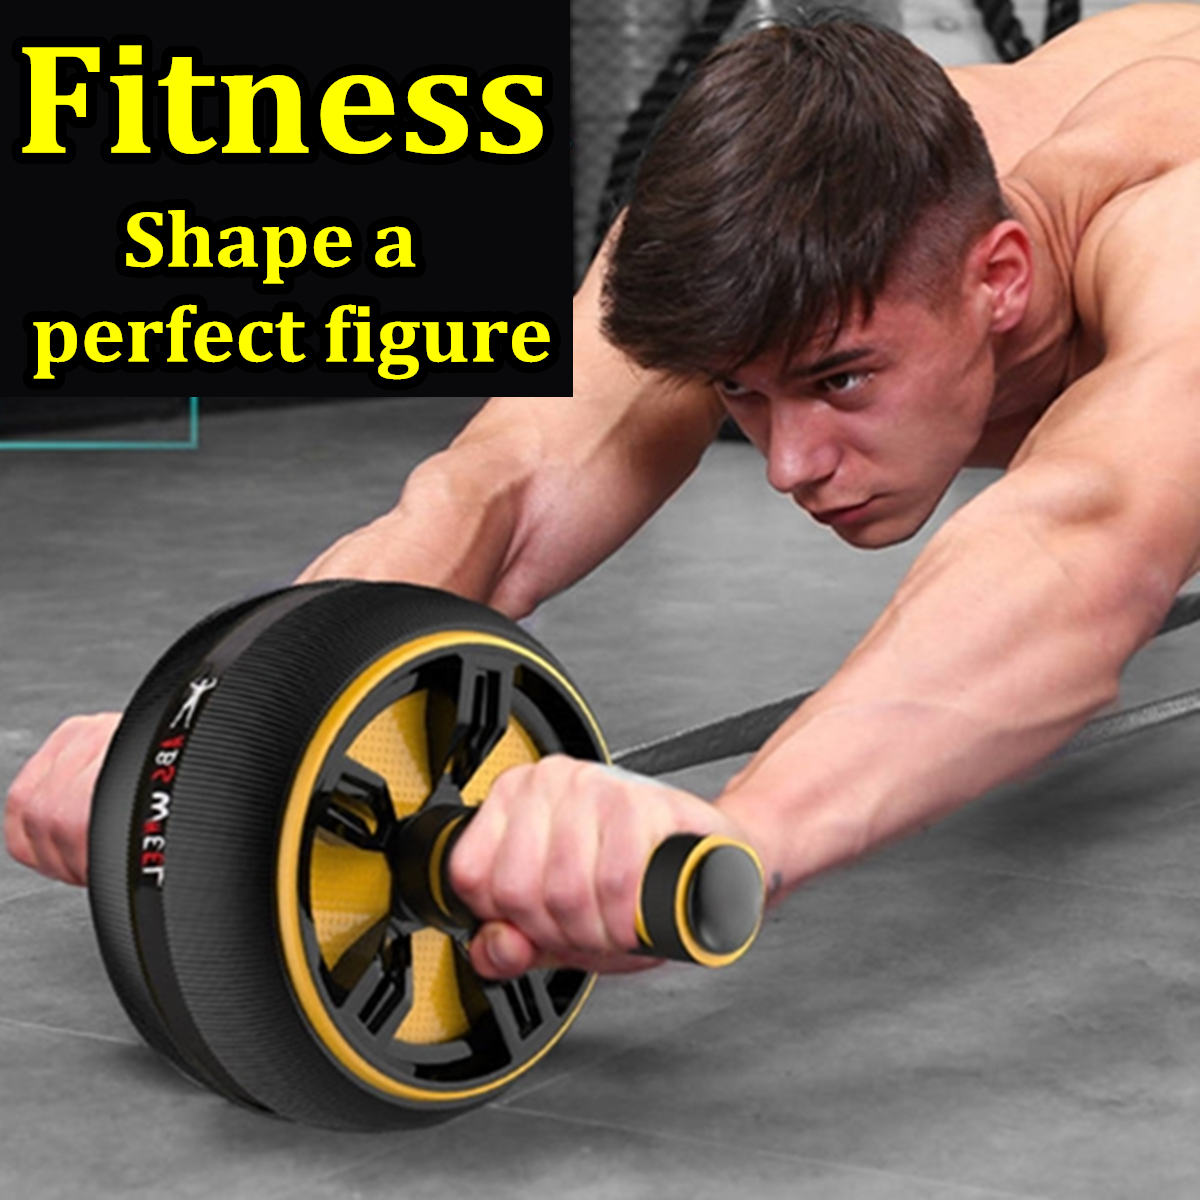 Home-Strength-Training-Fitness-Set-Abdominal-Wheel-Roller-Push-Up-Stand-Fitness-Gloves-Hand-Gripper--1667601-2